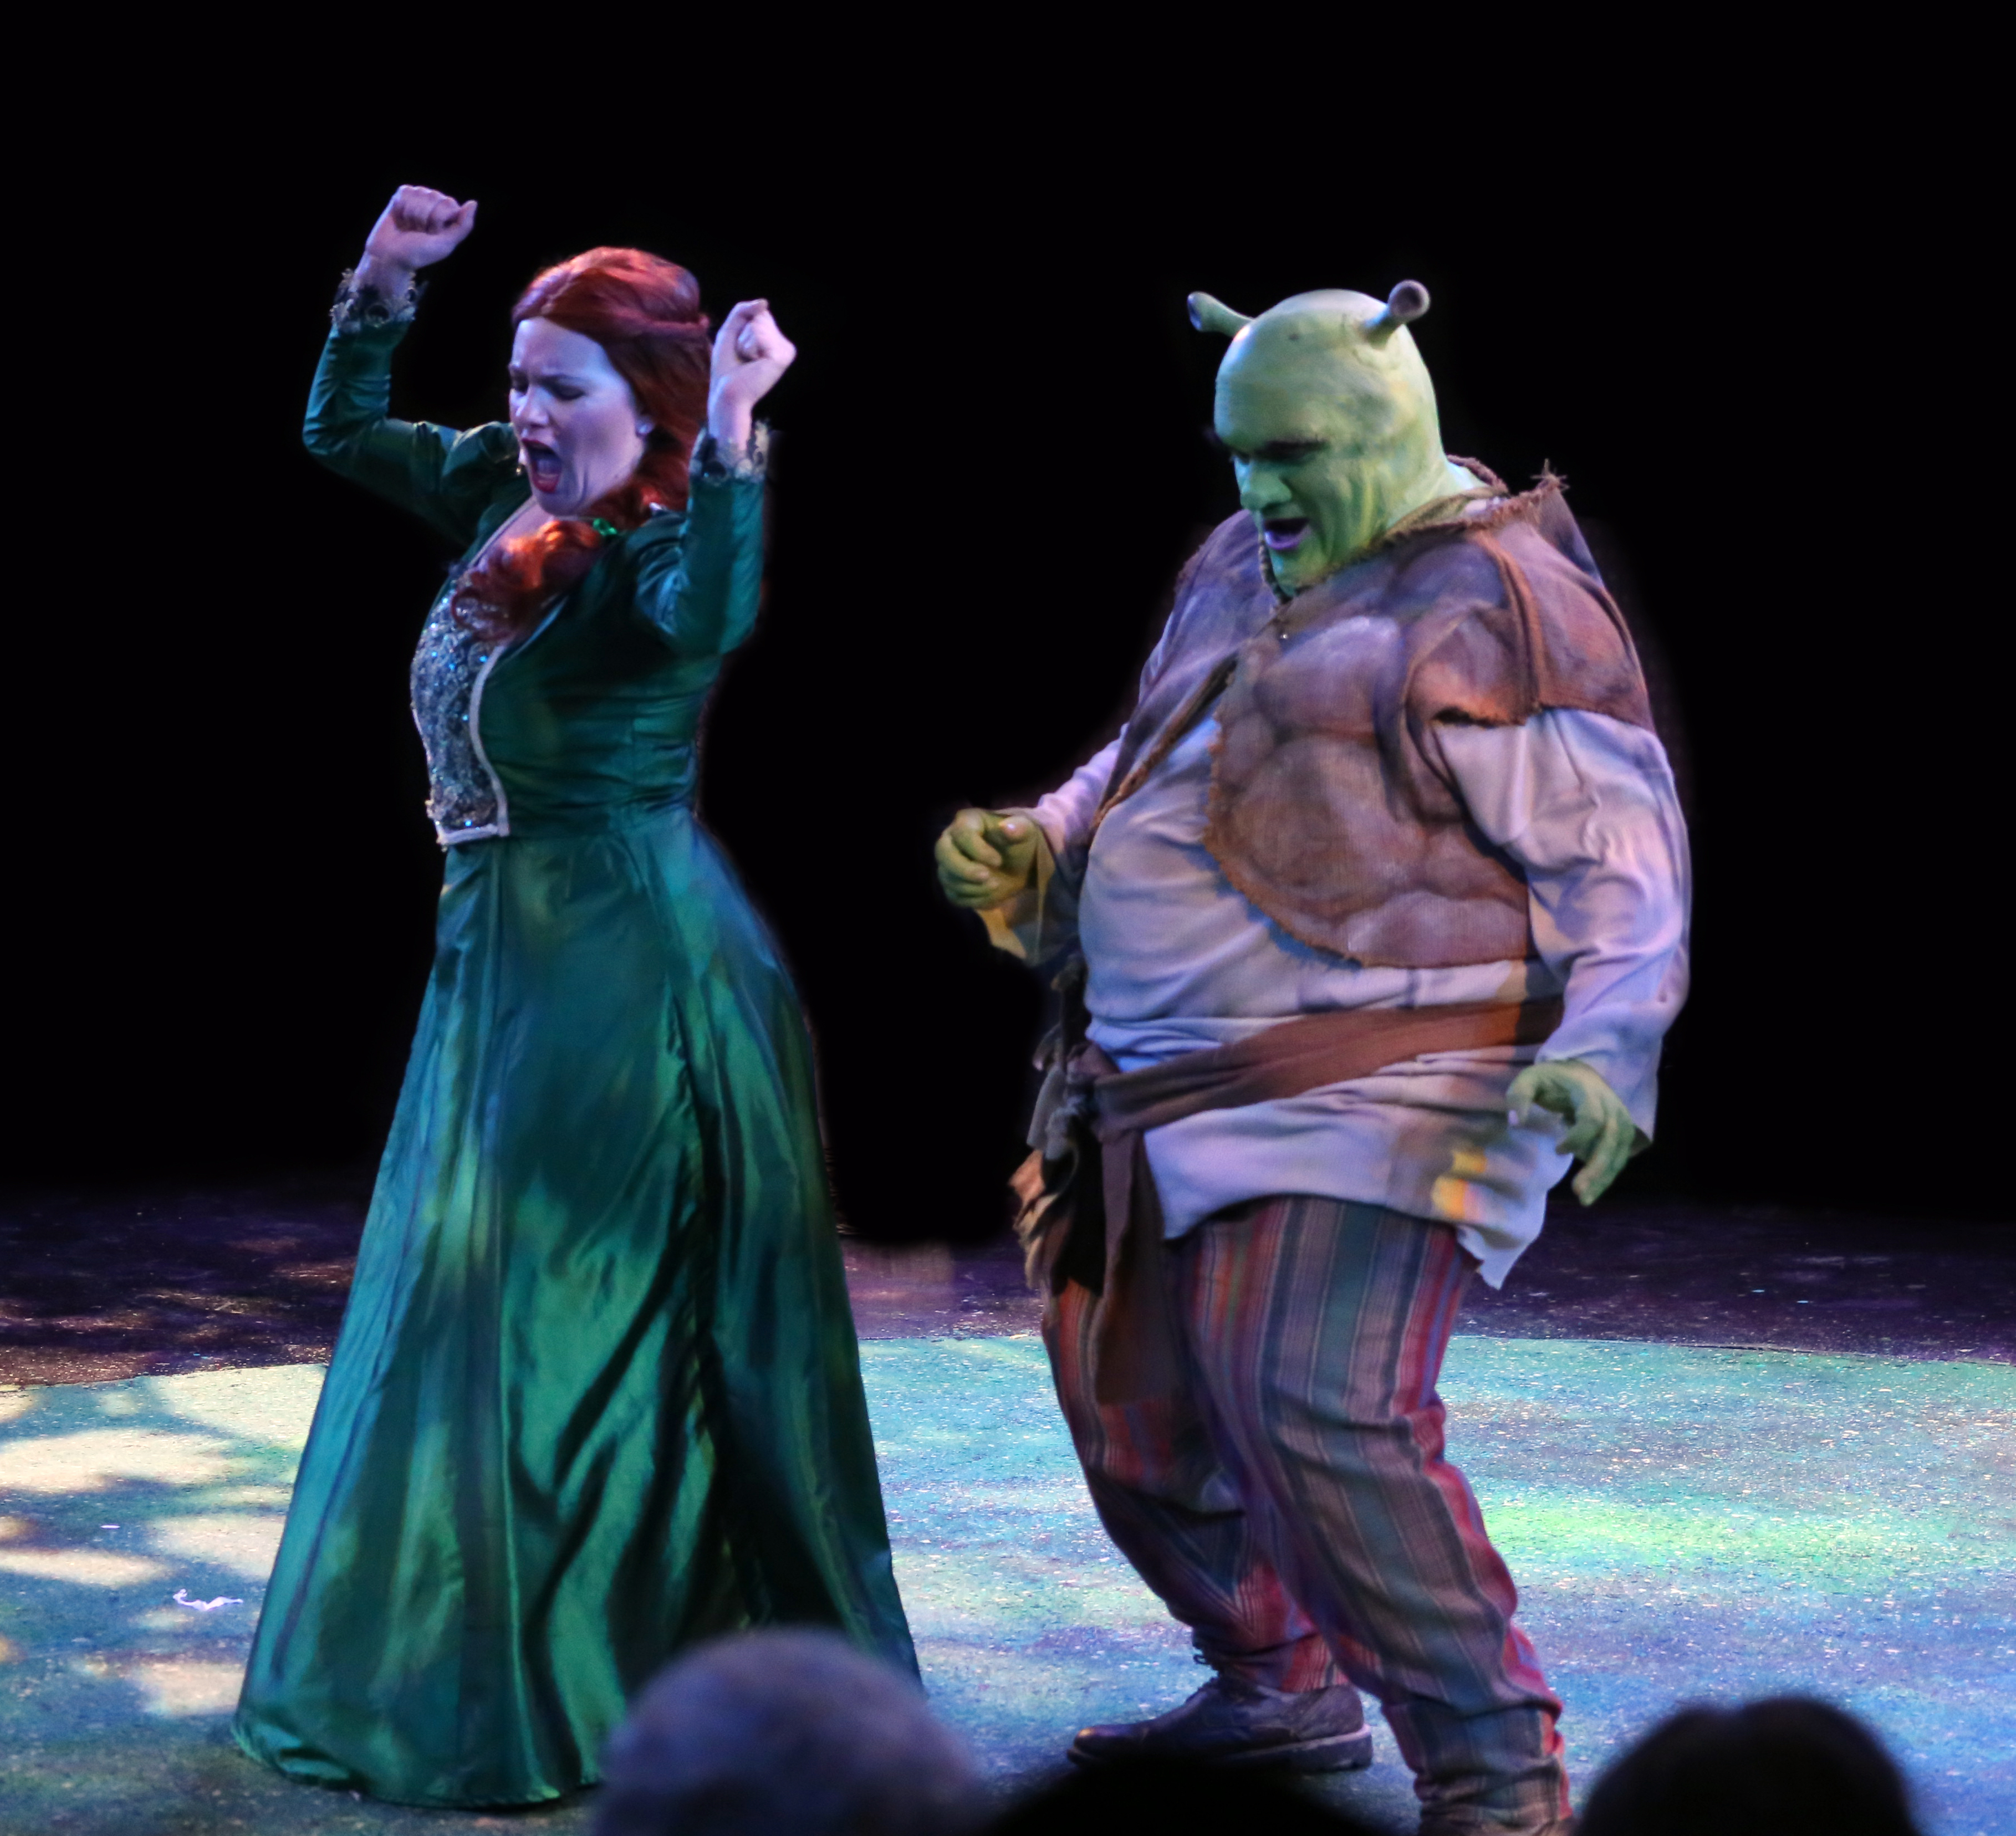 Shrek and Fiona dancing as they think they have each other beat.